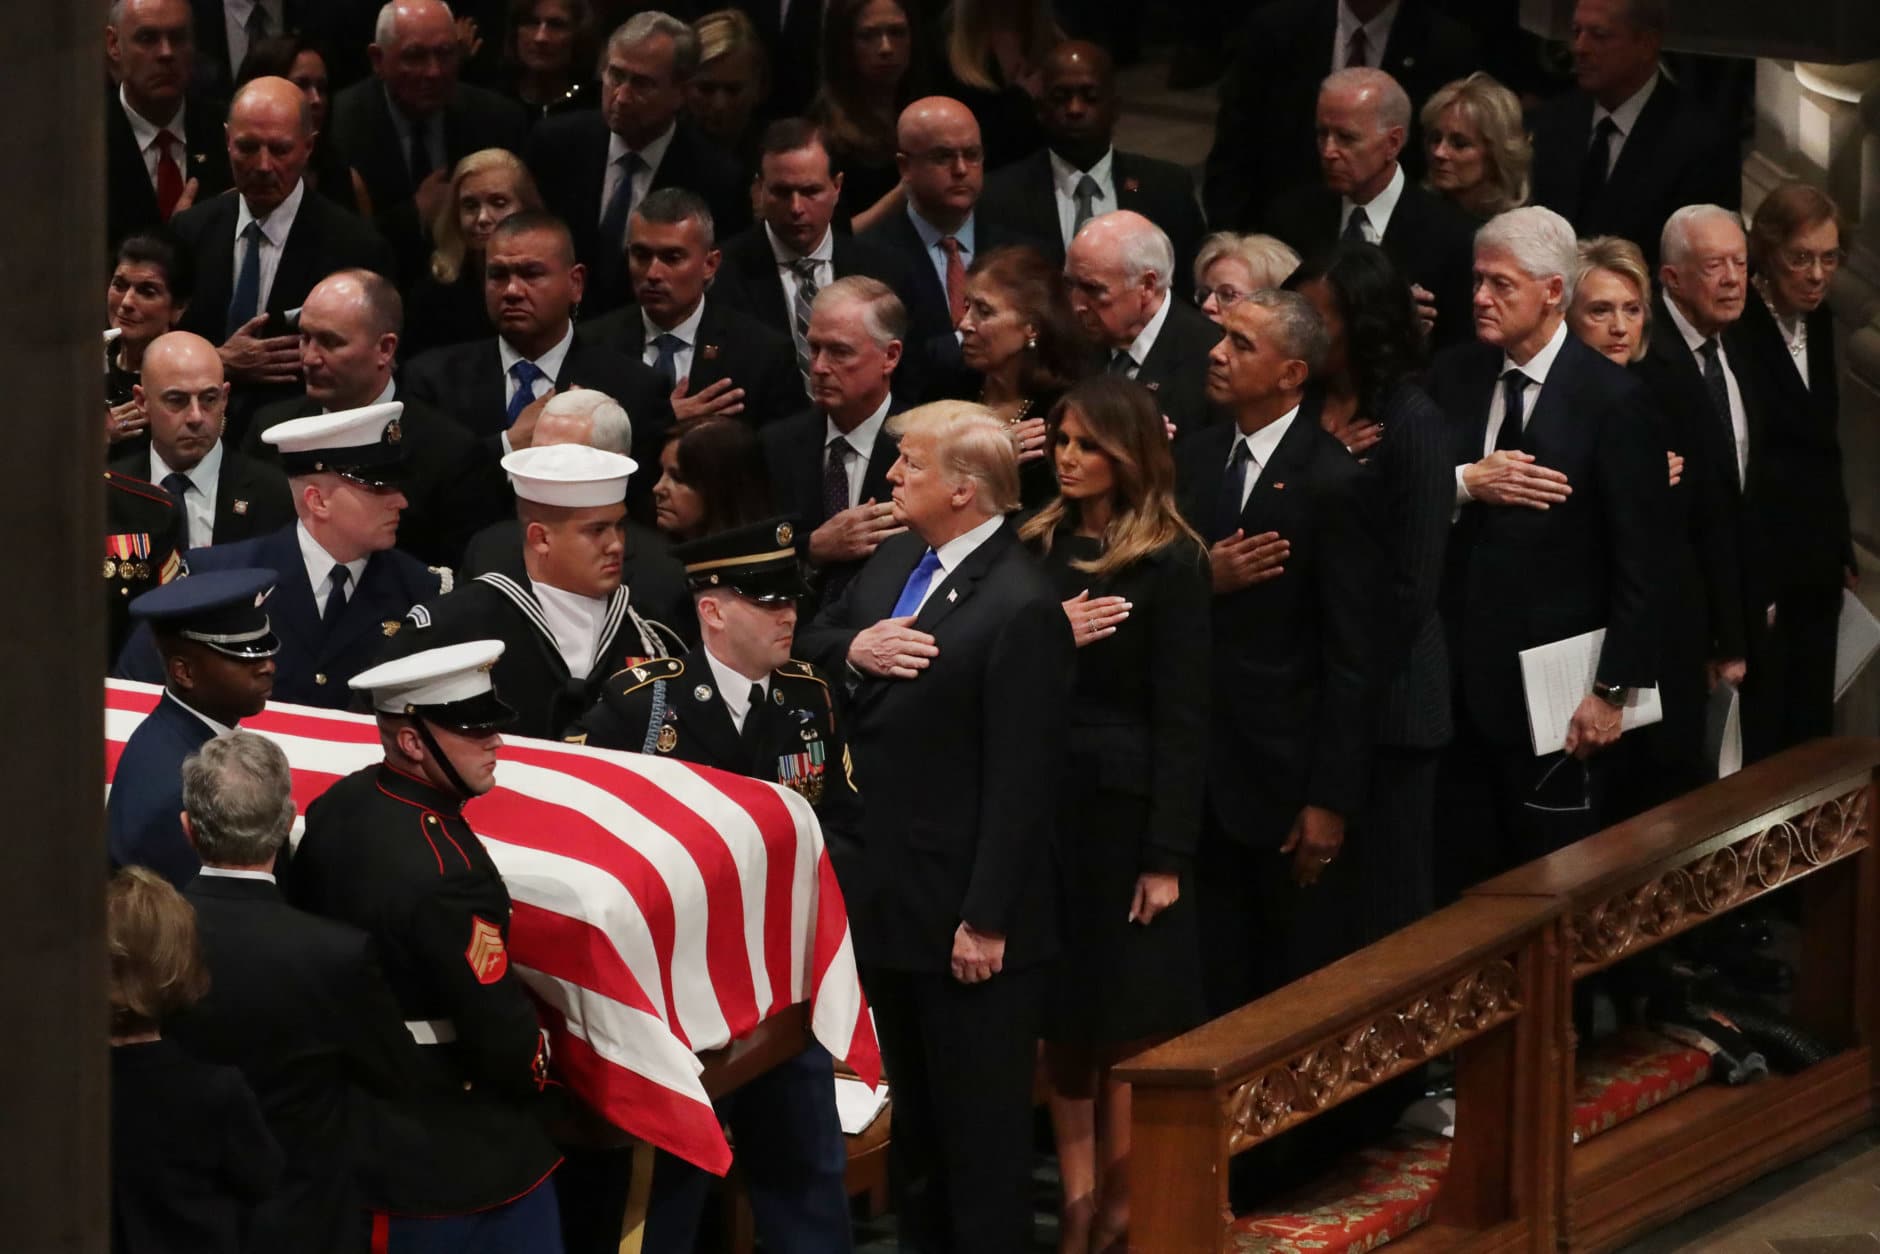 President Donald Trump, first lady Melania Trump and former presidents, vice presidents, first ladies and spouses attend the state funeral for former President George H.W. Bush at the National Cathedral December 05, 2018 in Washington, DC. A WWII combat veteran, Bush served as a member of Congress from Texas, ambassador to the United Nations, director of the CIA, vice president and 41st president of the United States.  (Photo by Chip Somodevilla/Getty Images)